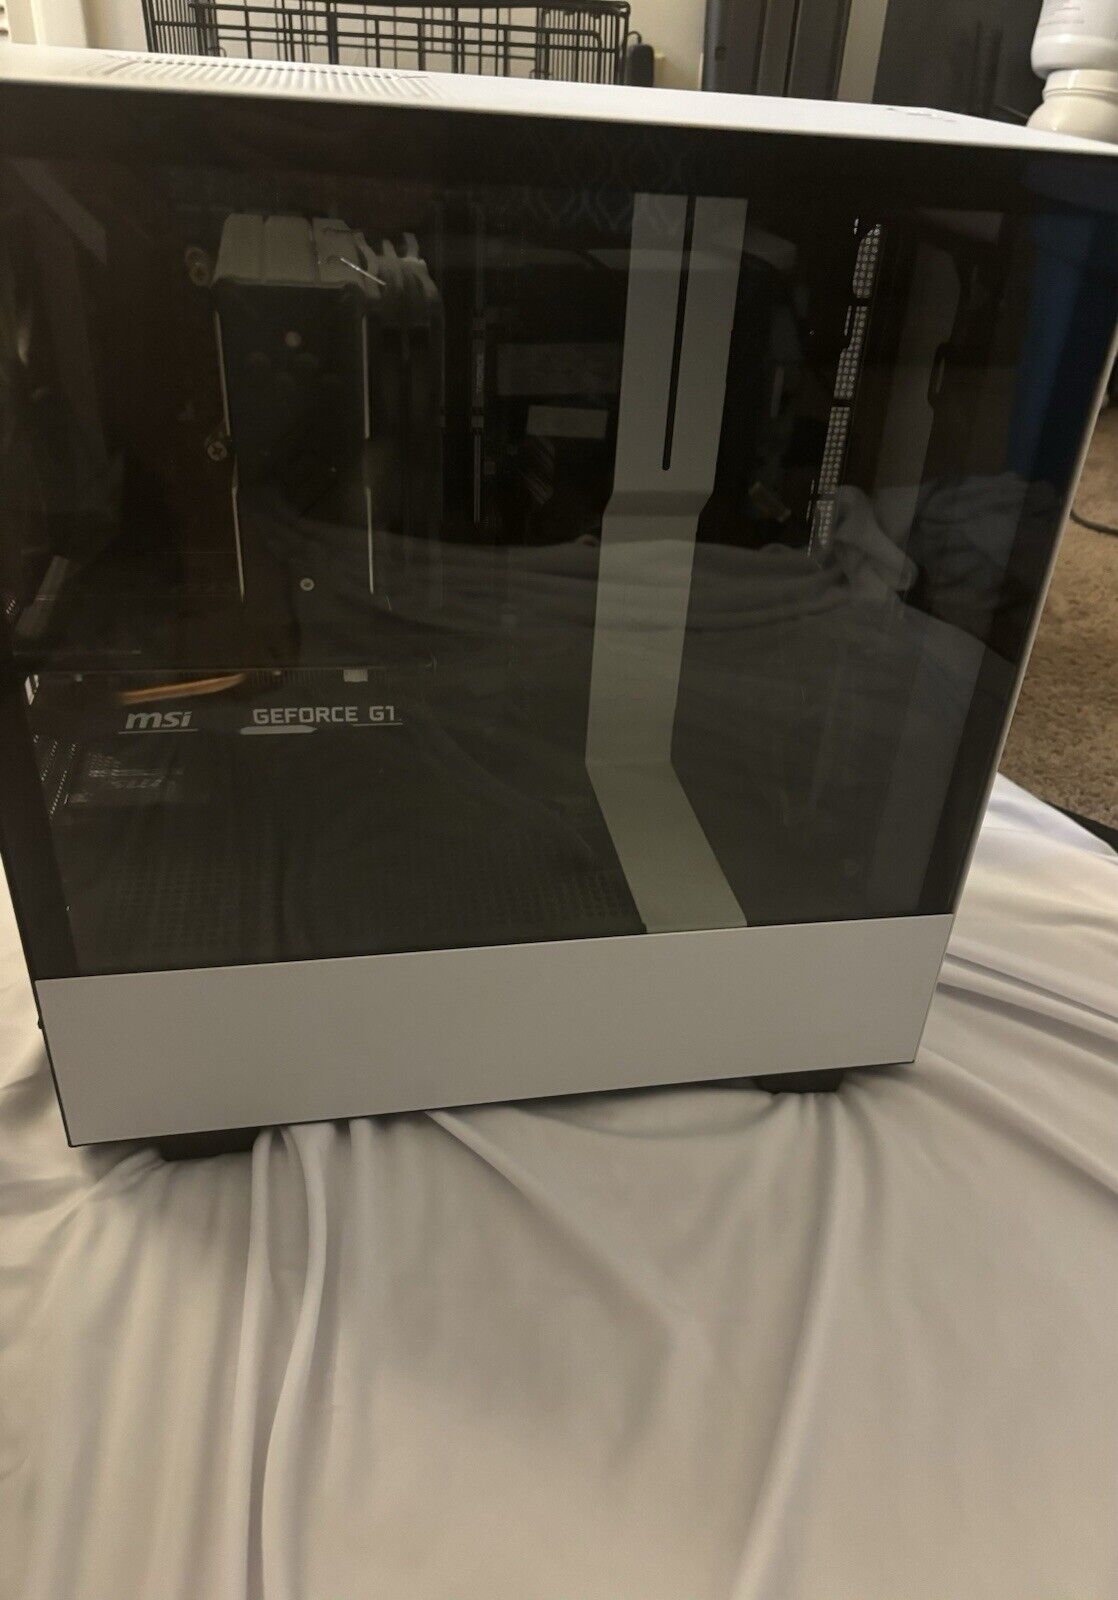 Prebuilt NZXT Gaming PC TESTED and In Great Condition